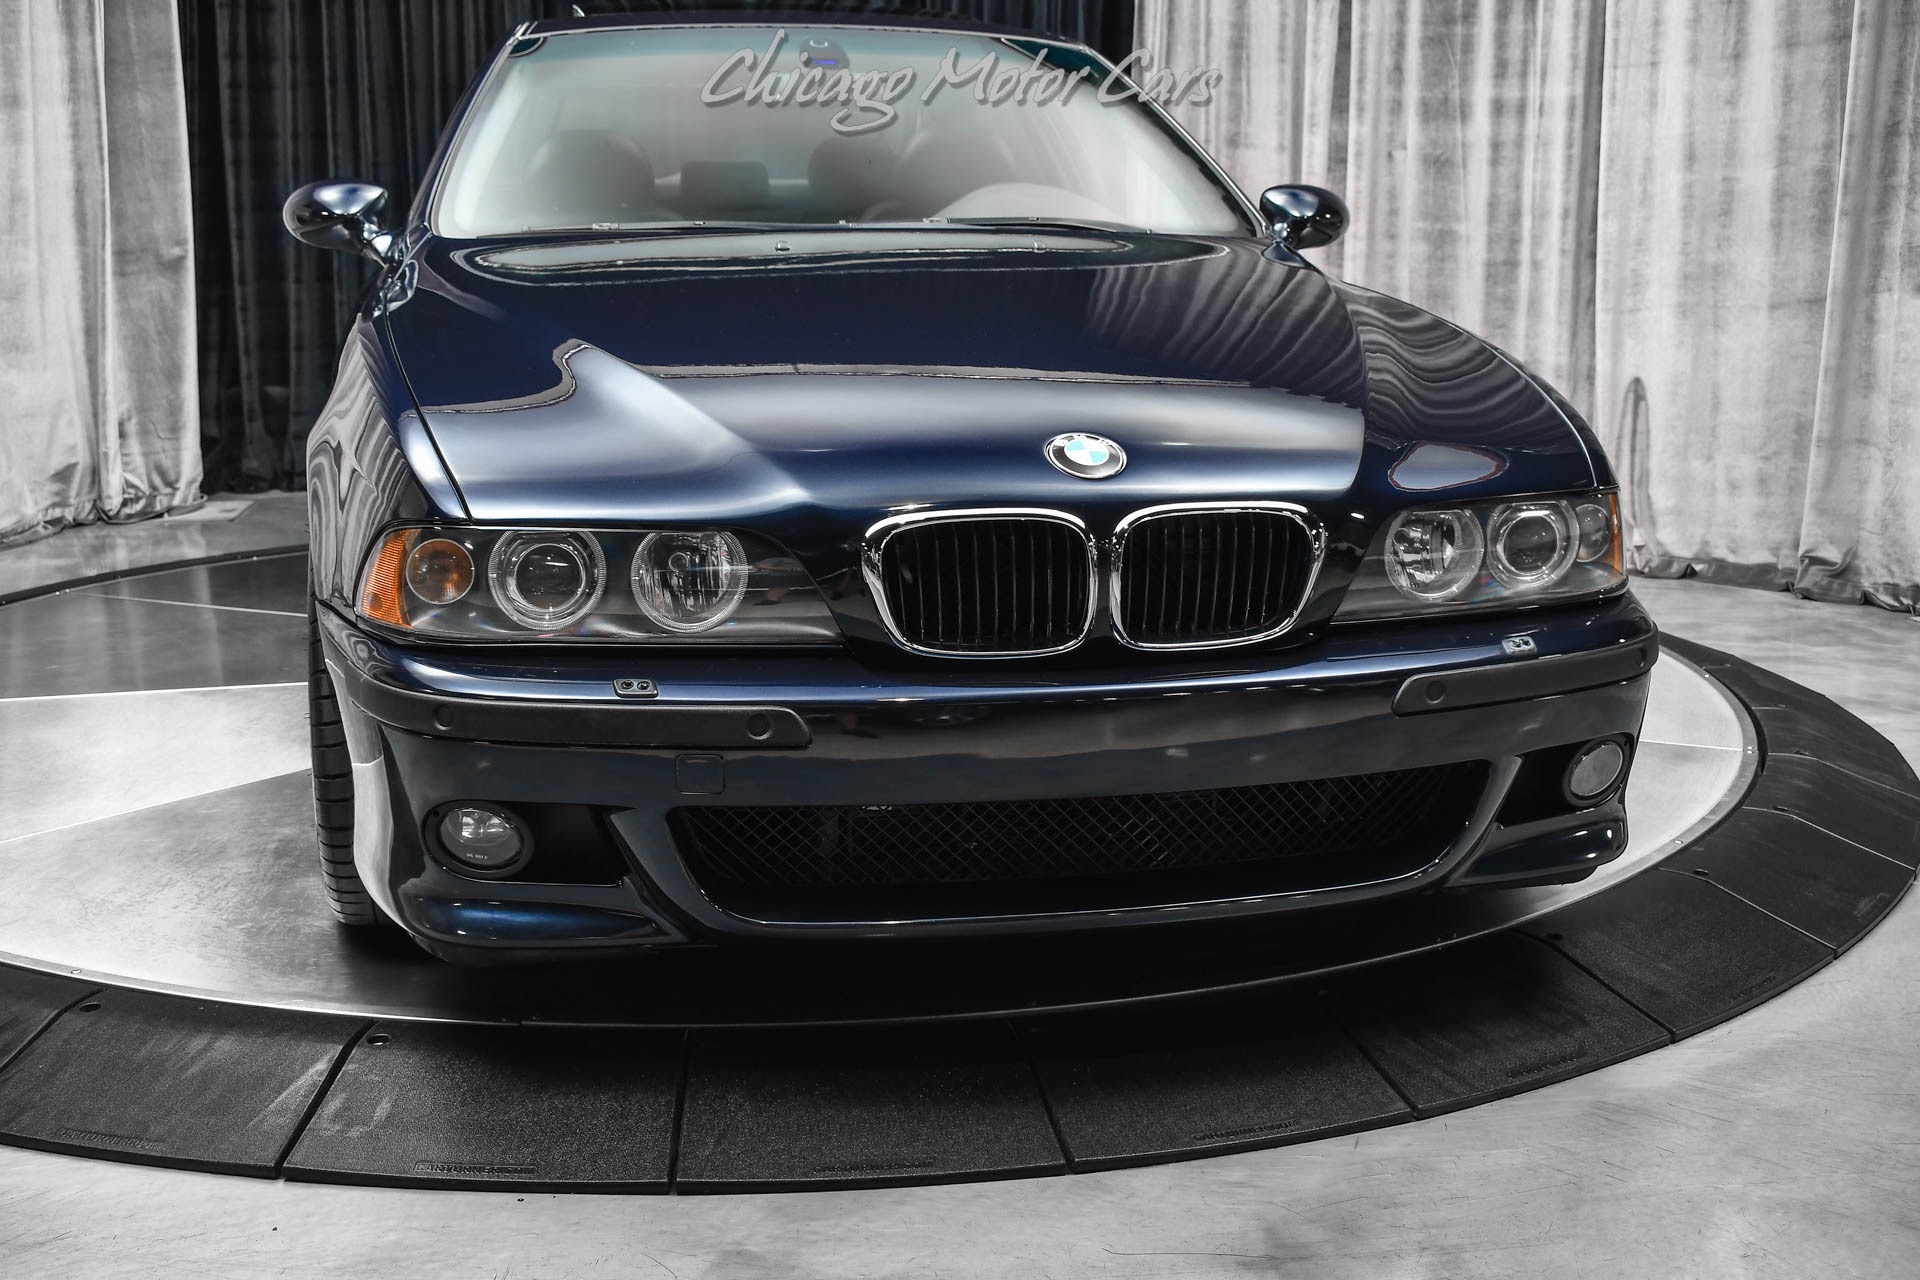 Used 2002 BMW M5 For Sale ($64,900)